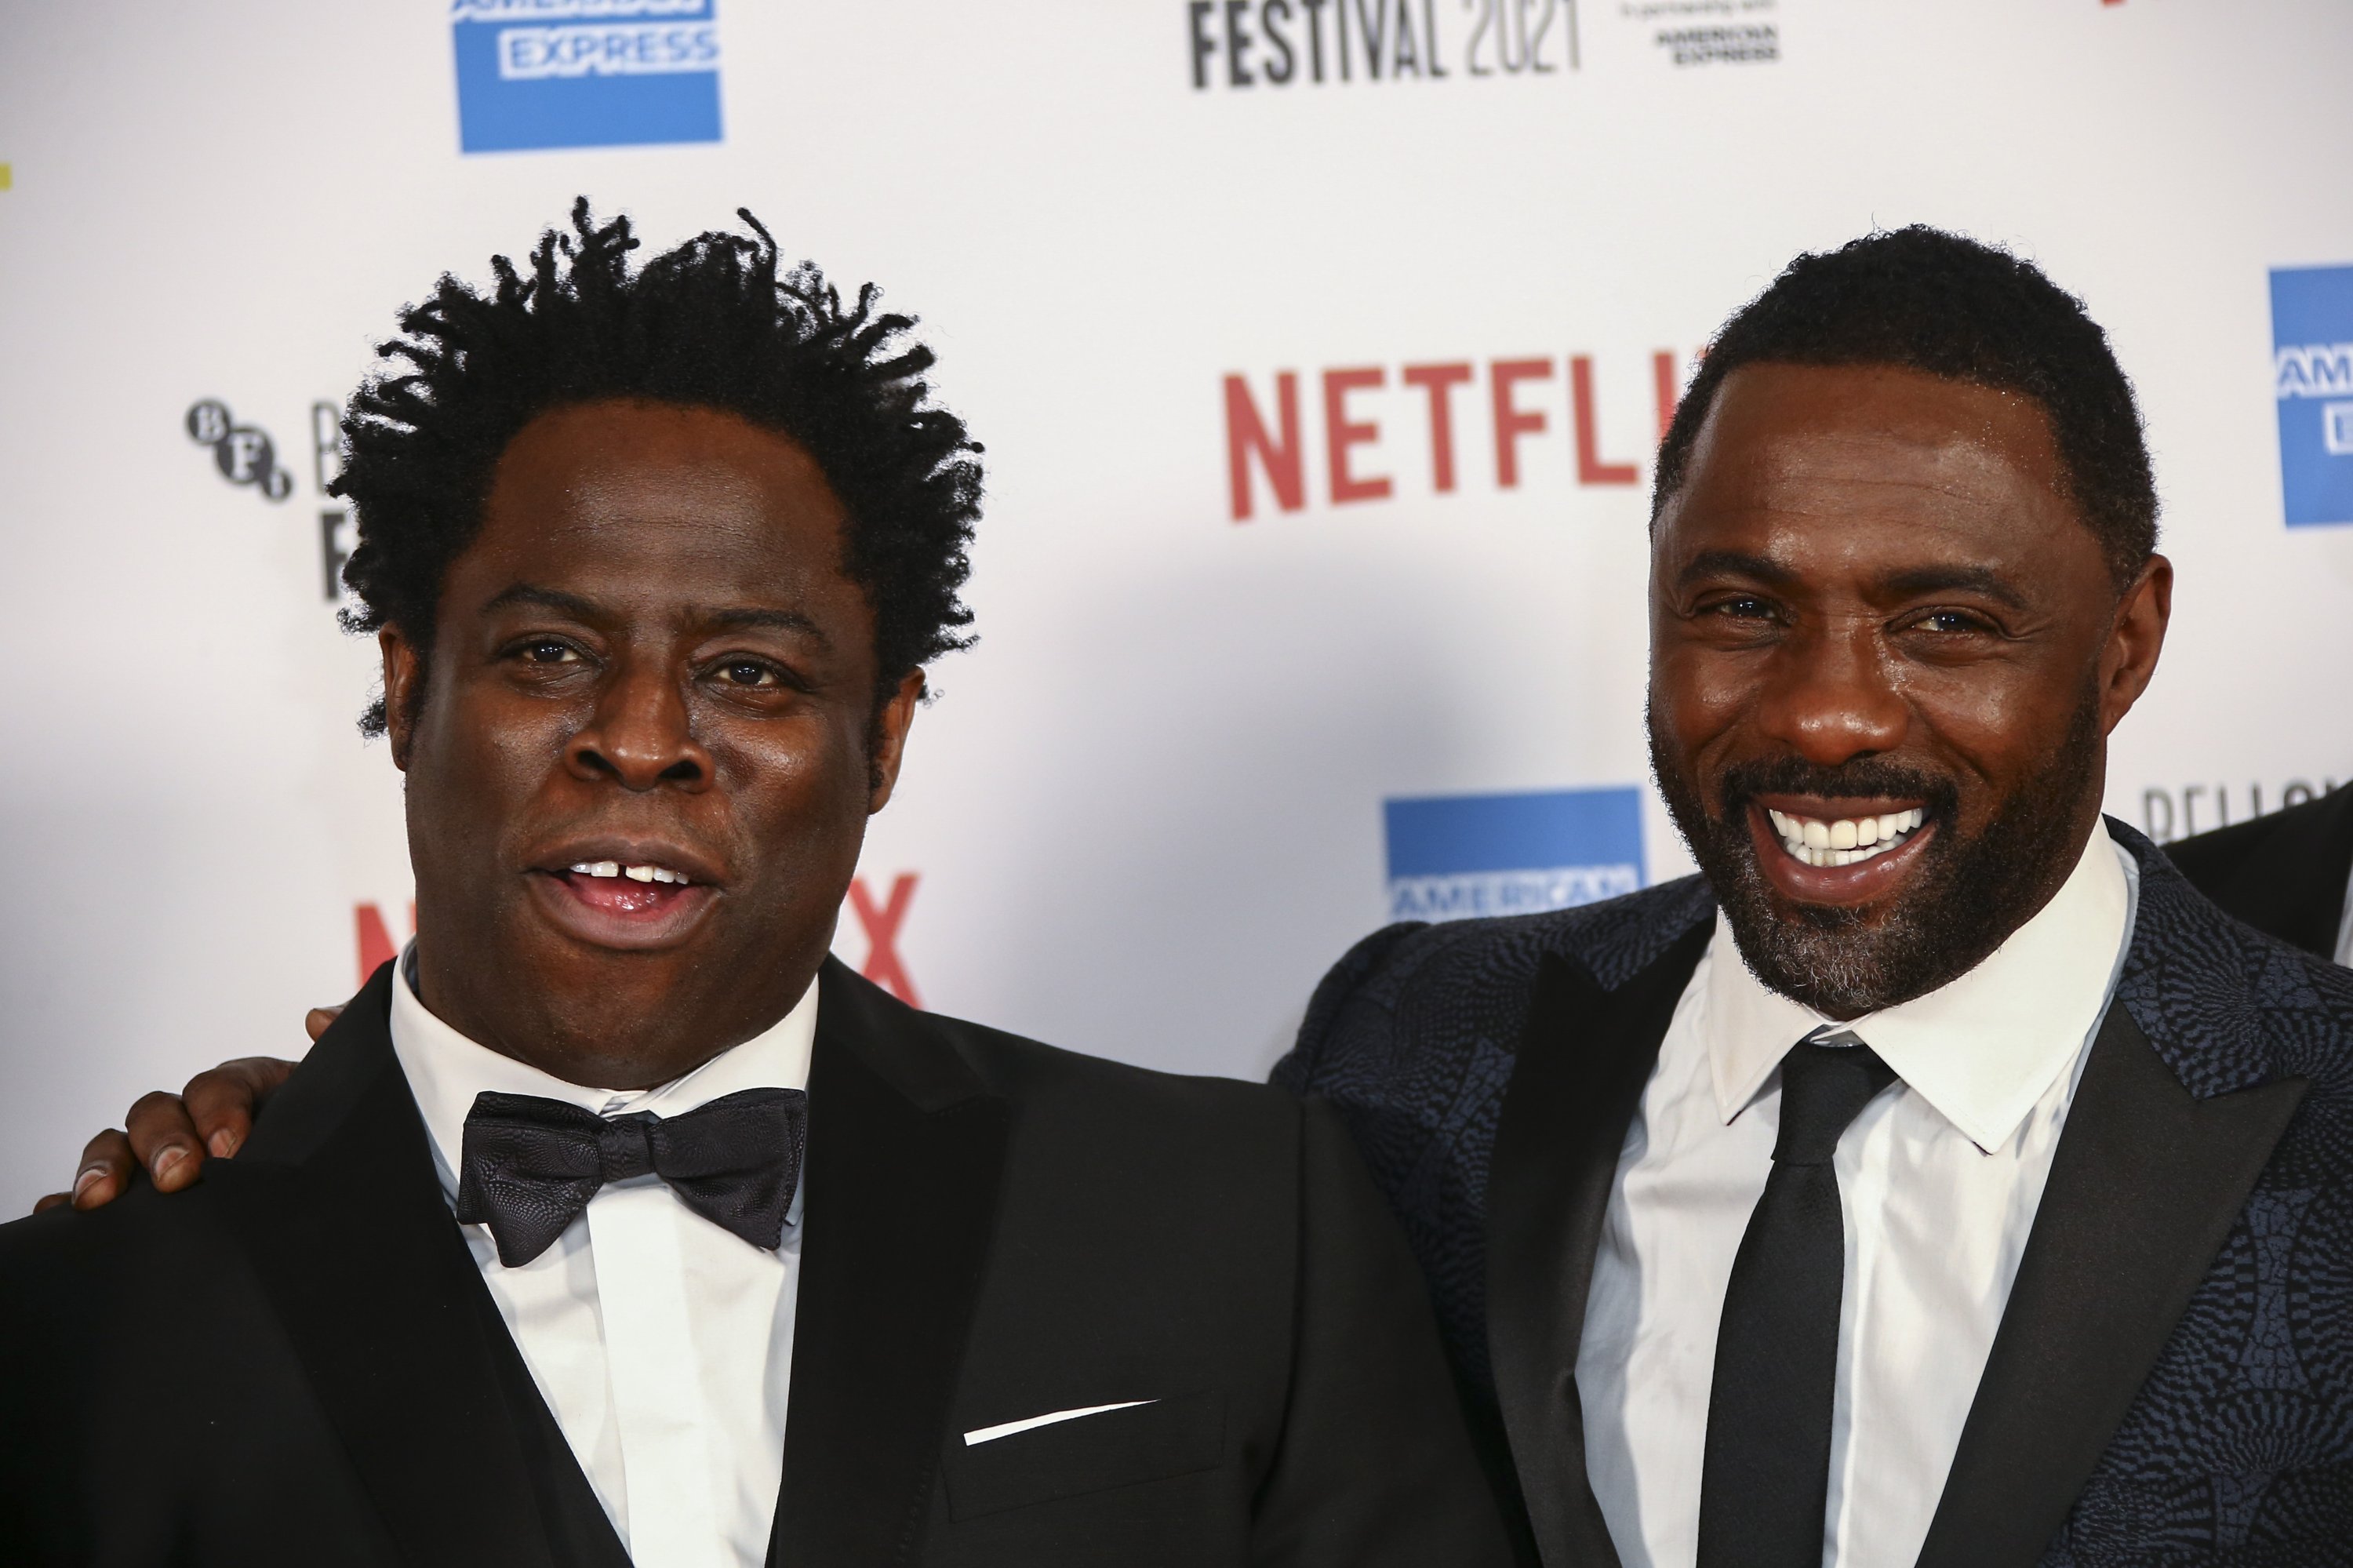 Idris Elba (R) and Jeymes Samuel pose for photographers upon arrival at the opening of the London film festival and the World premiere of the film "The Harder They Fall" in London, Oct. 6, 2021. (AP)